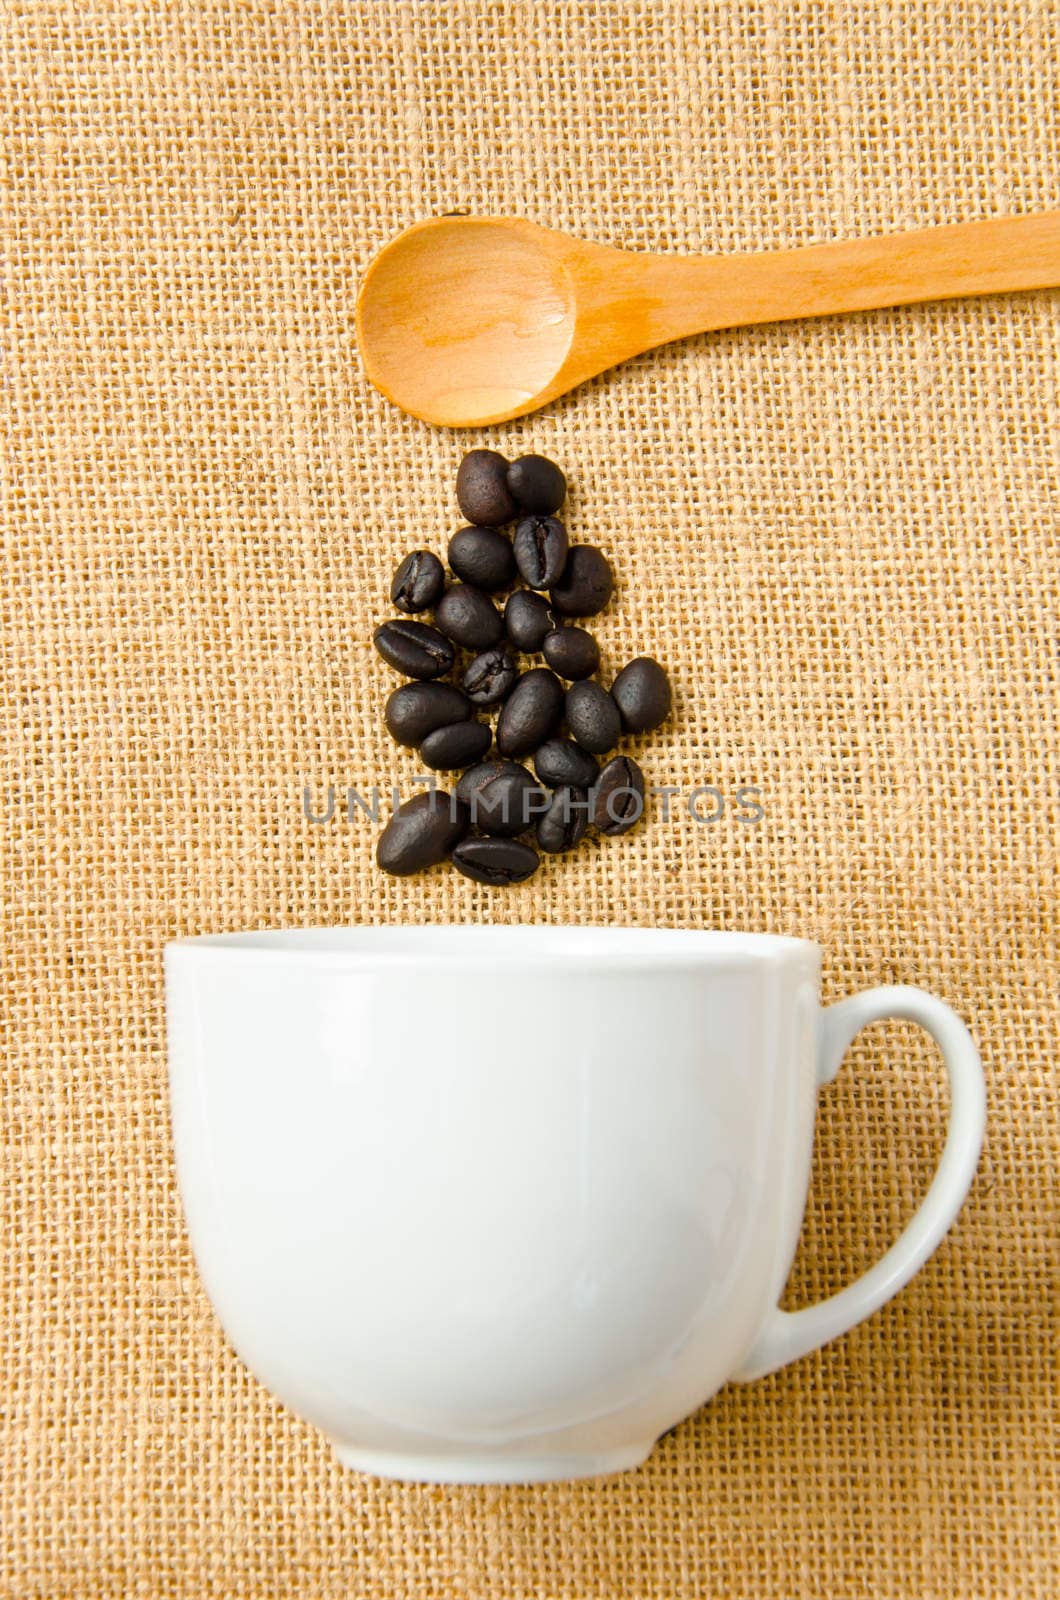 Seed coffee, wooden spoon and a cup of coffee on sacks background